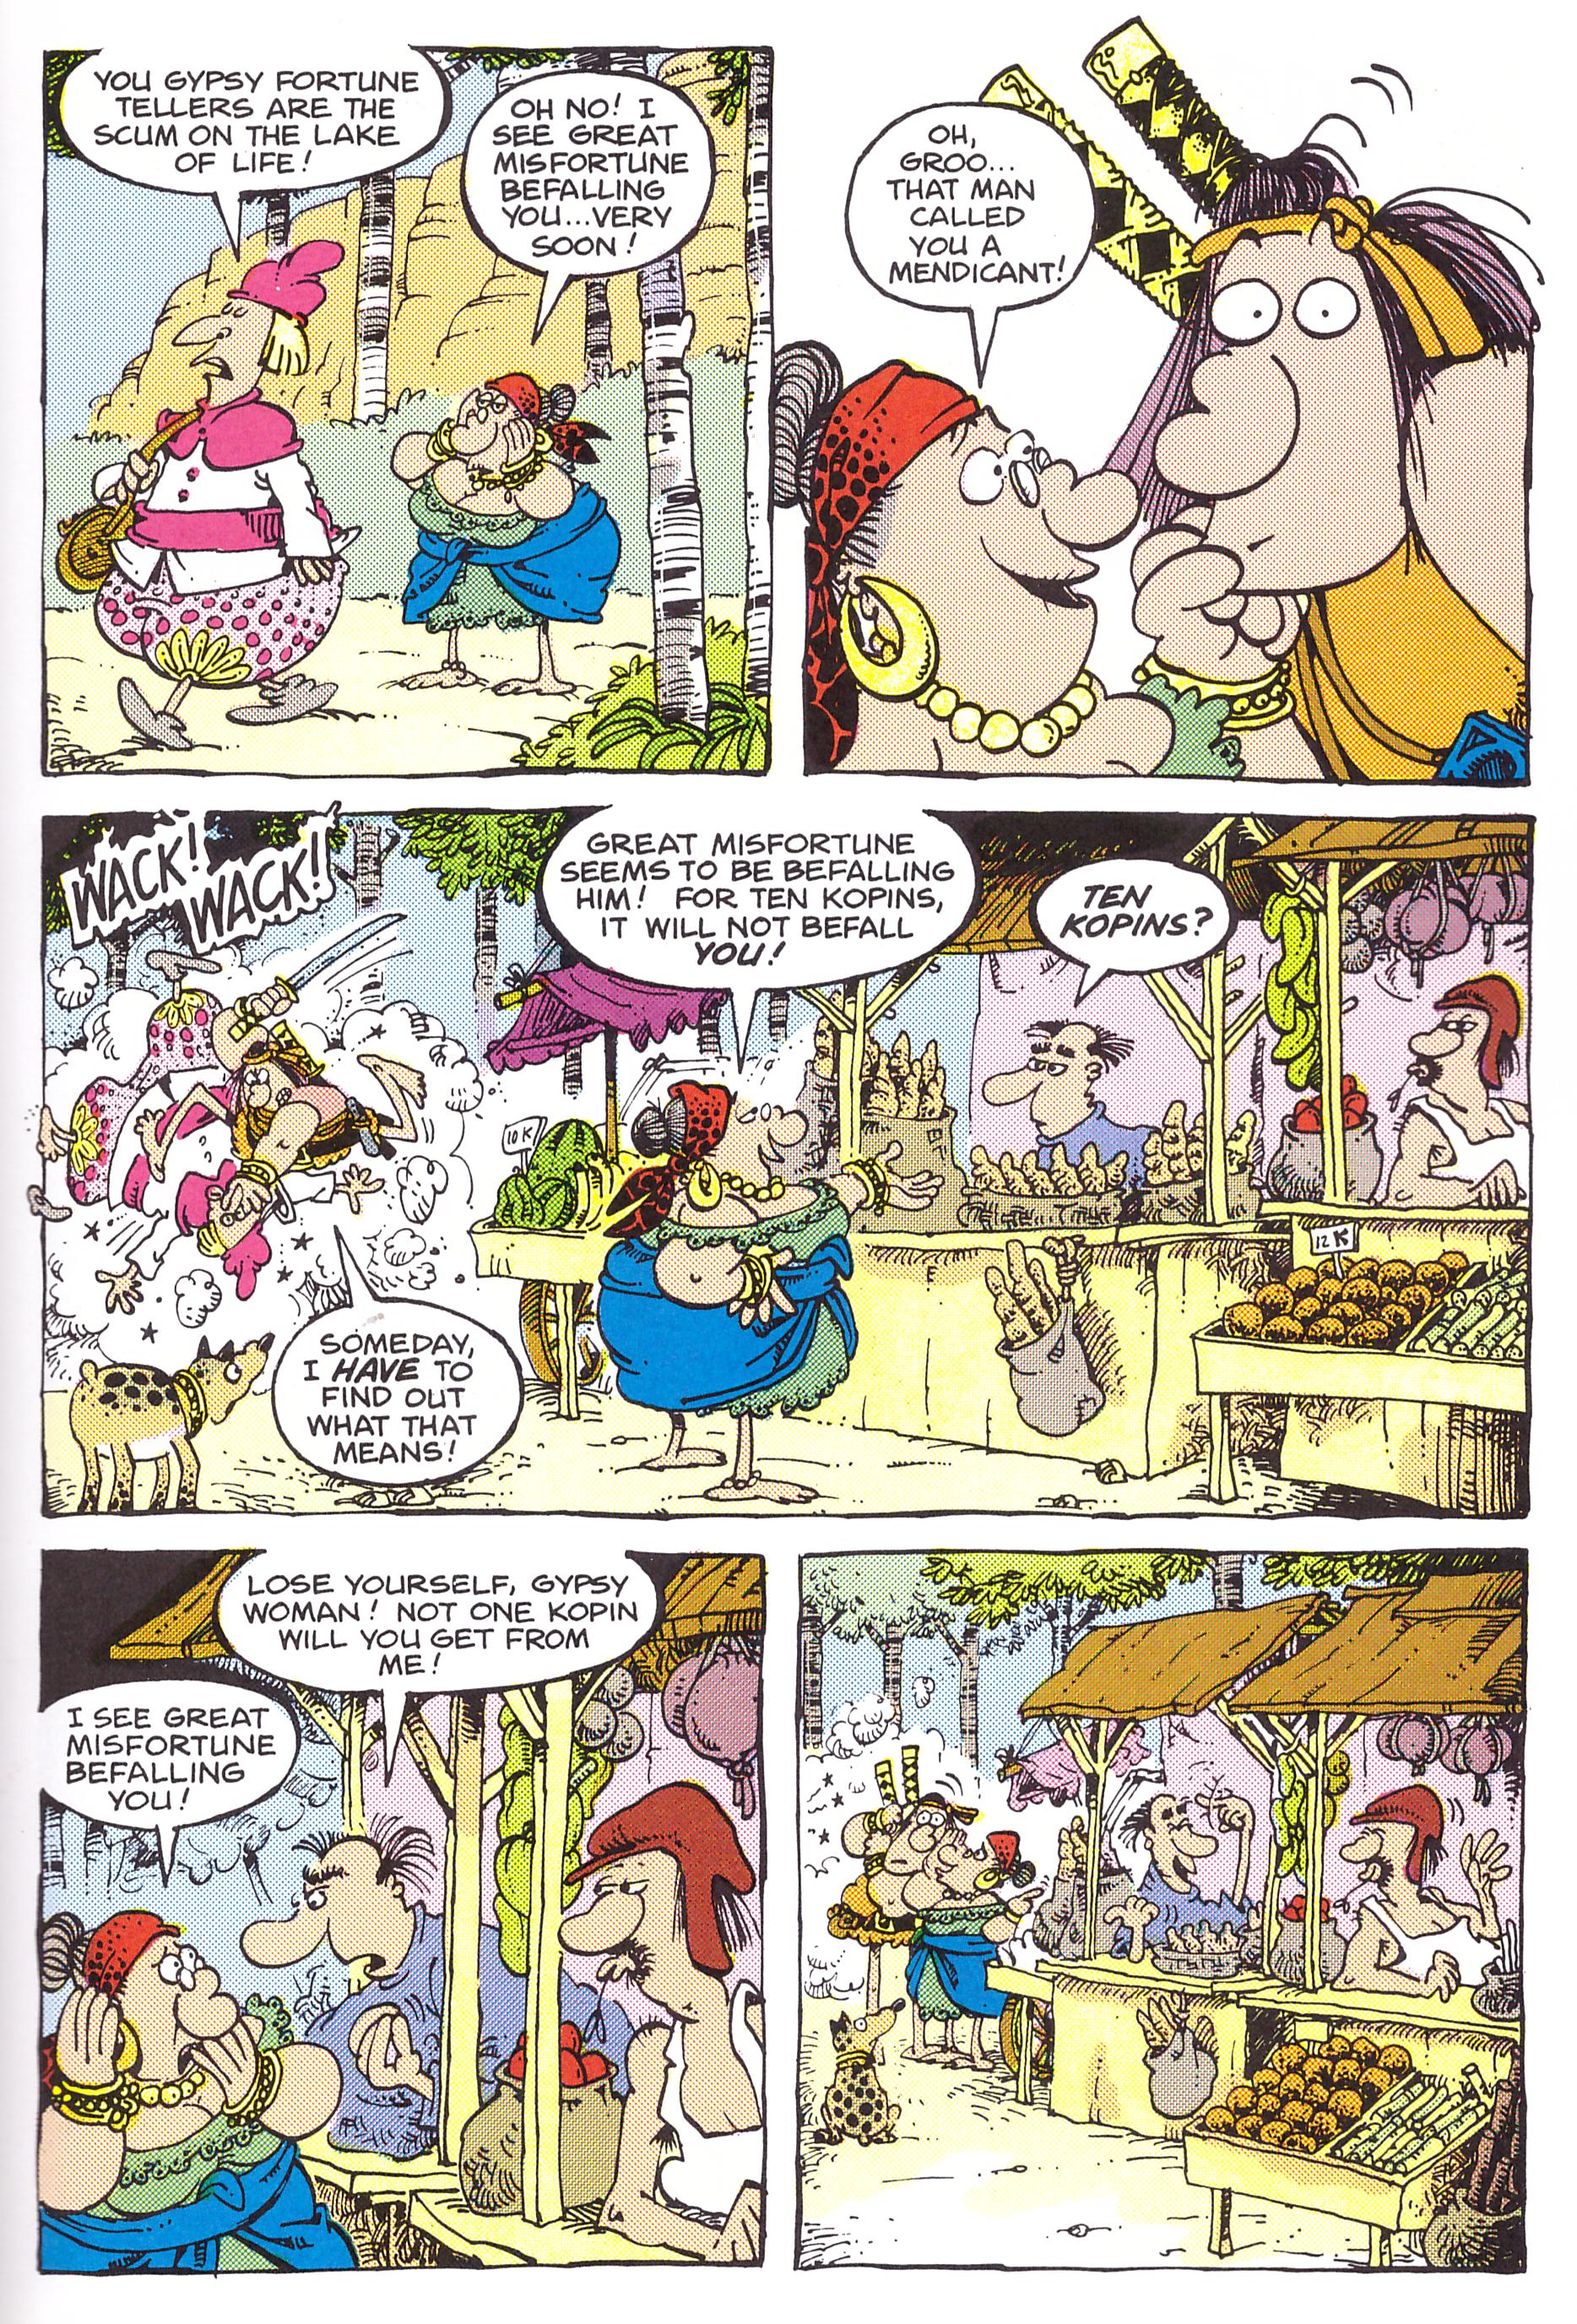 The Groo Kingdom review